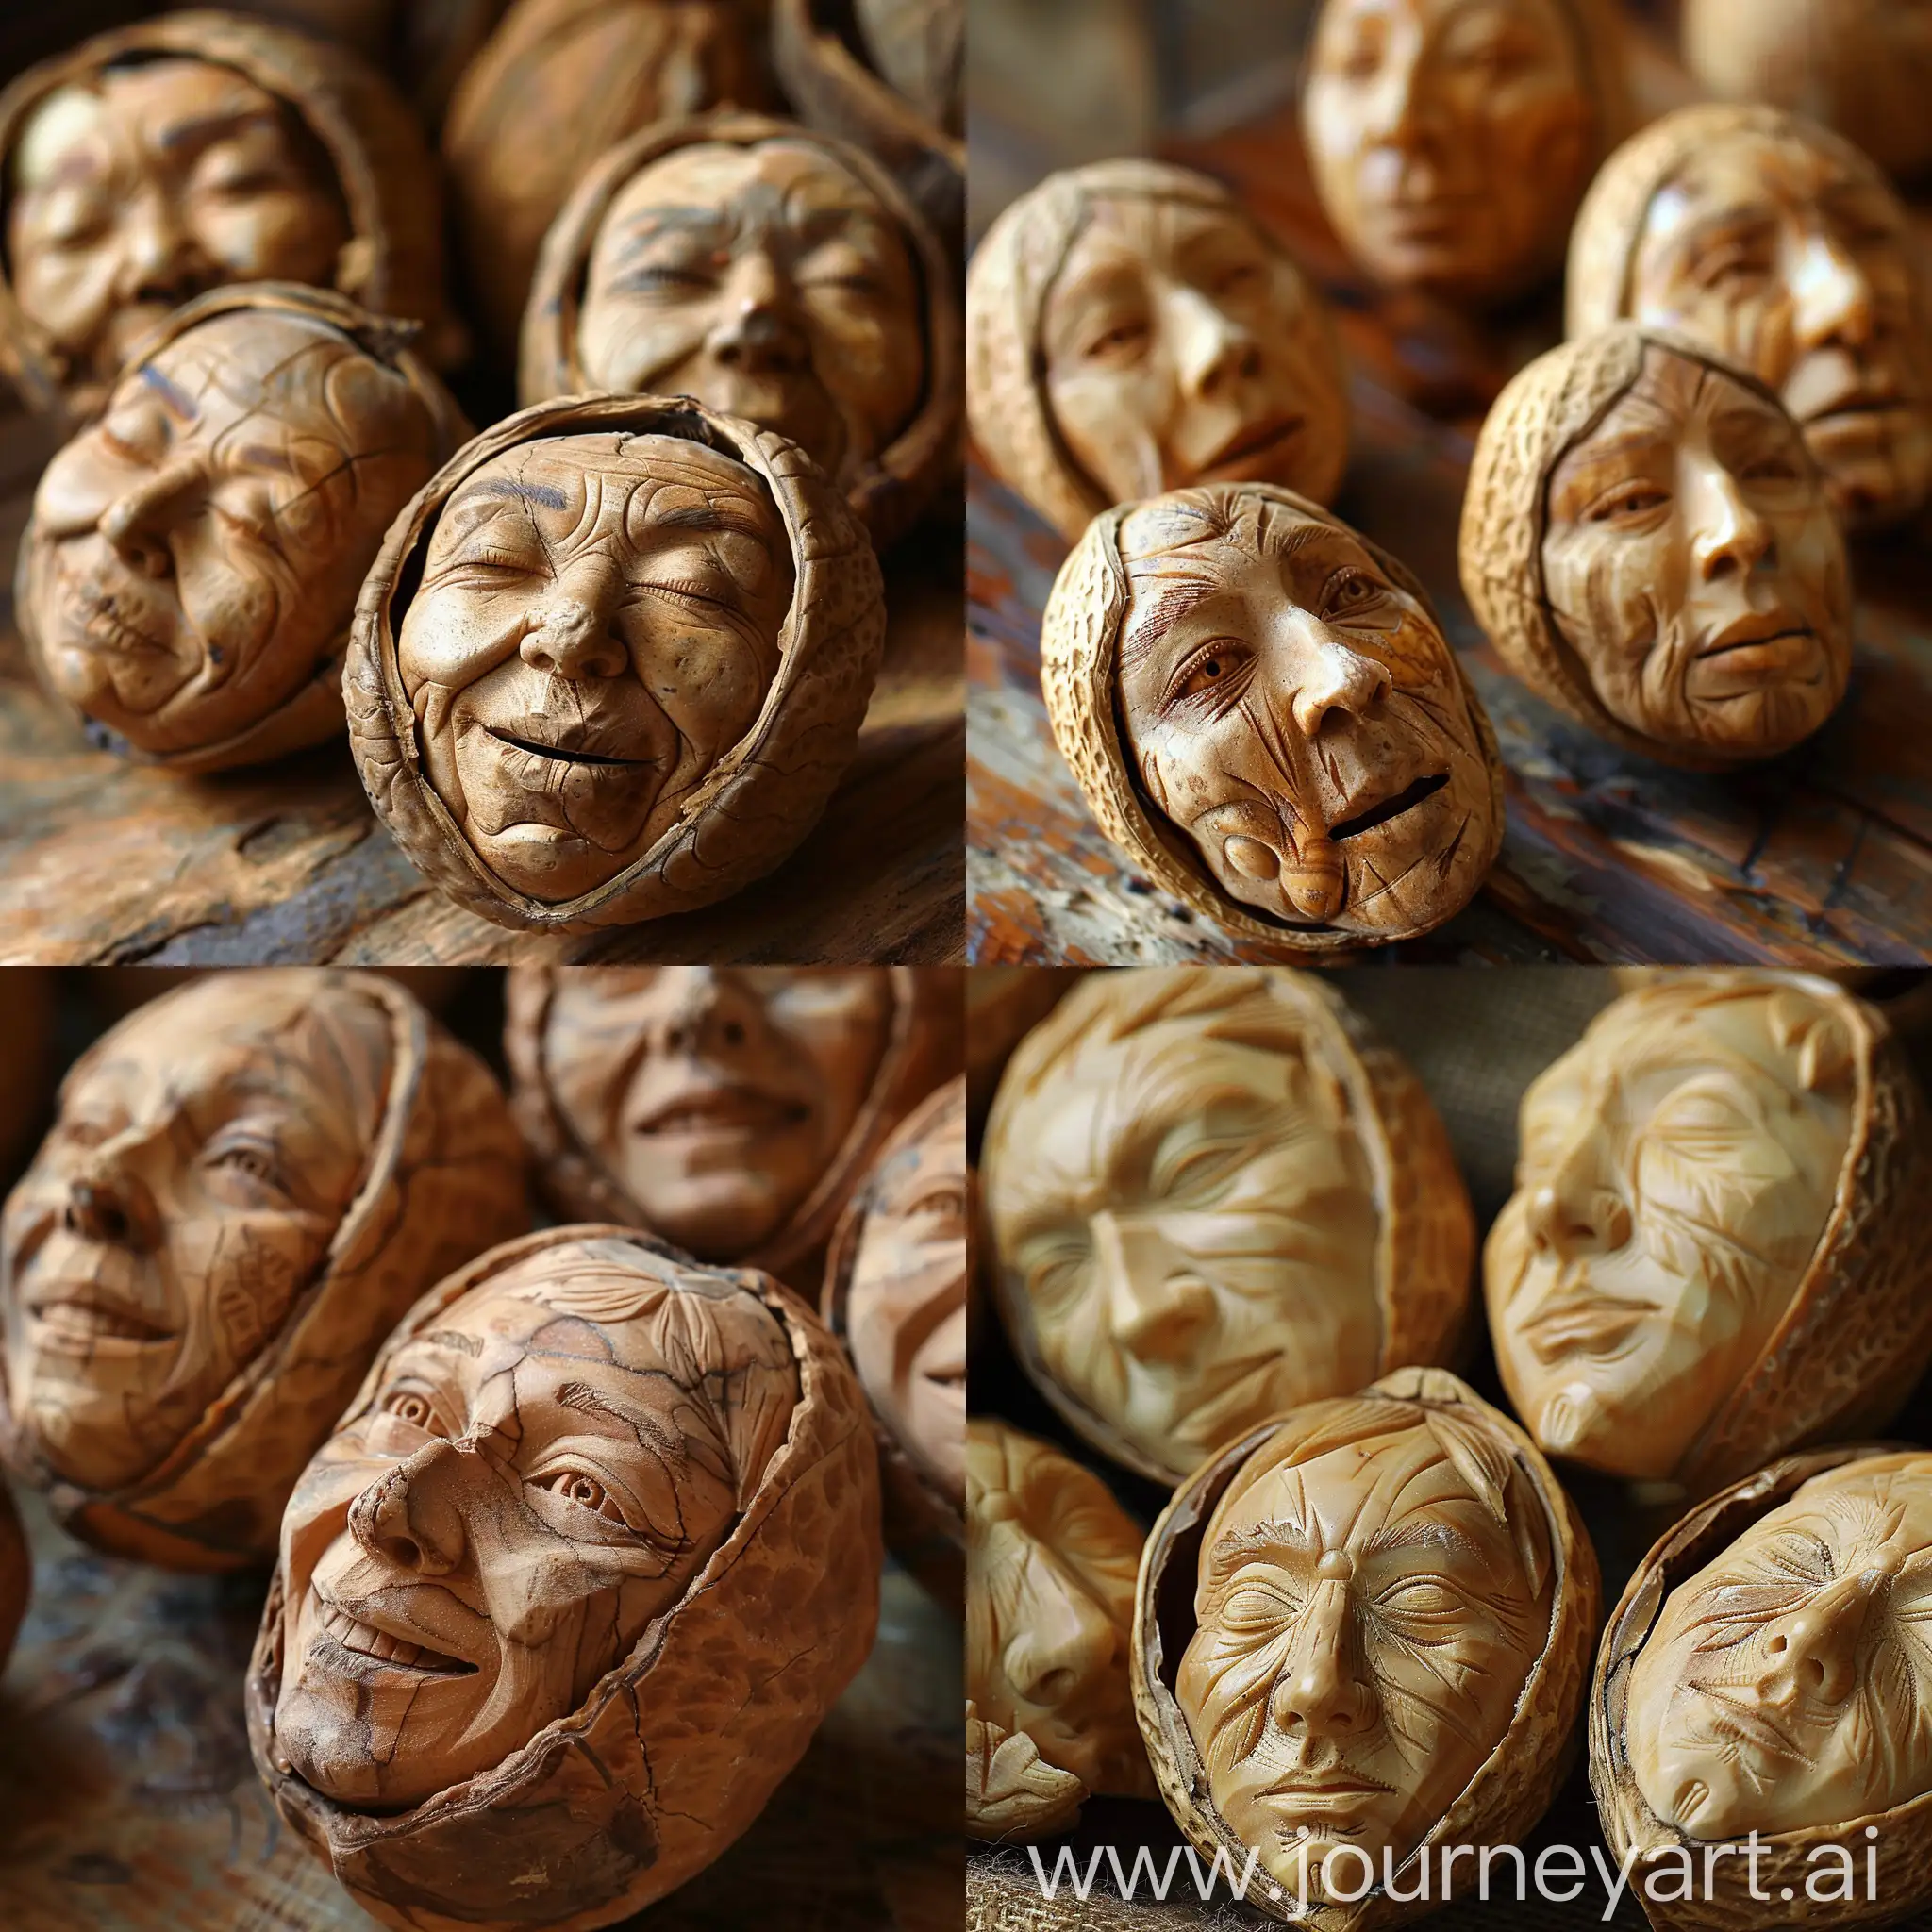 <https://i.ibb.co/S5Ts7qK/432089330-961687558653525-3005170550136609345-n.jpg> Nuts with human faces carved into the shell